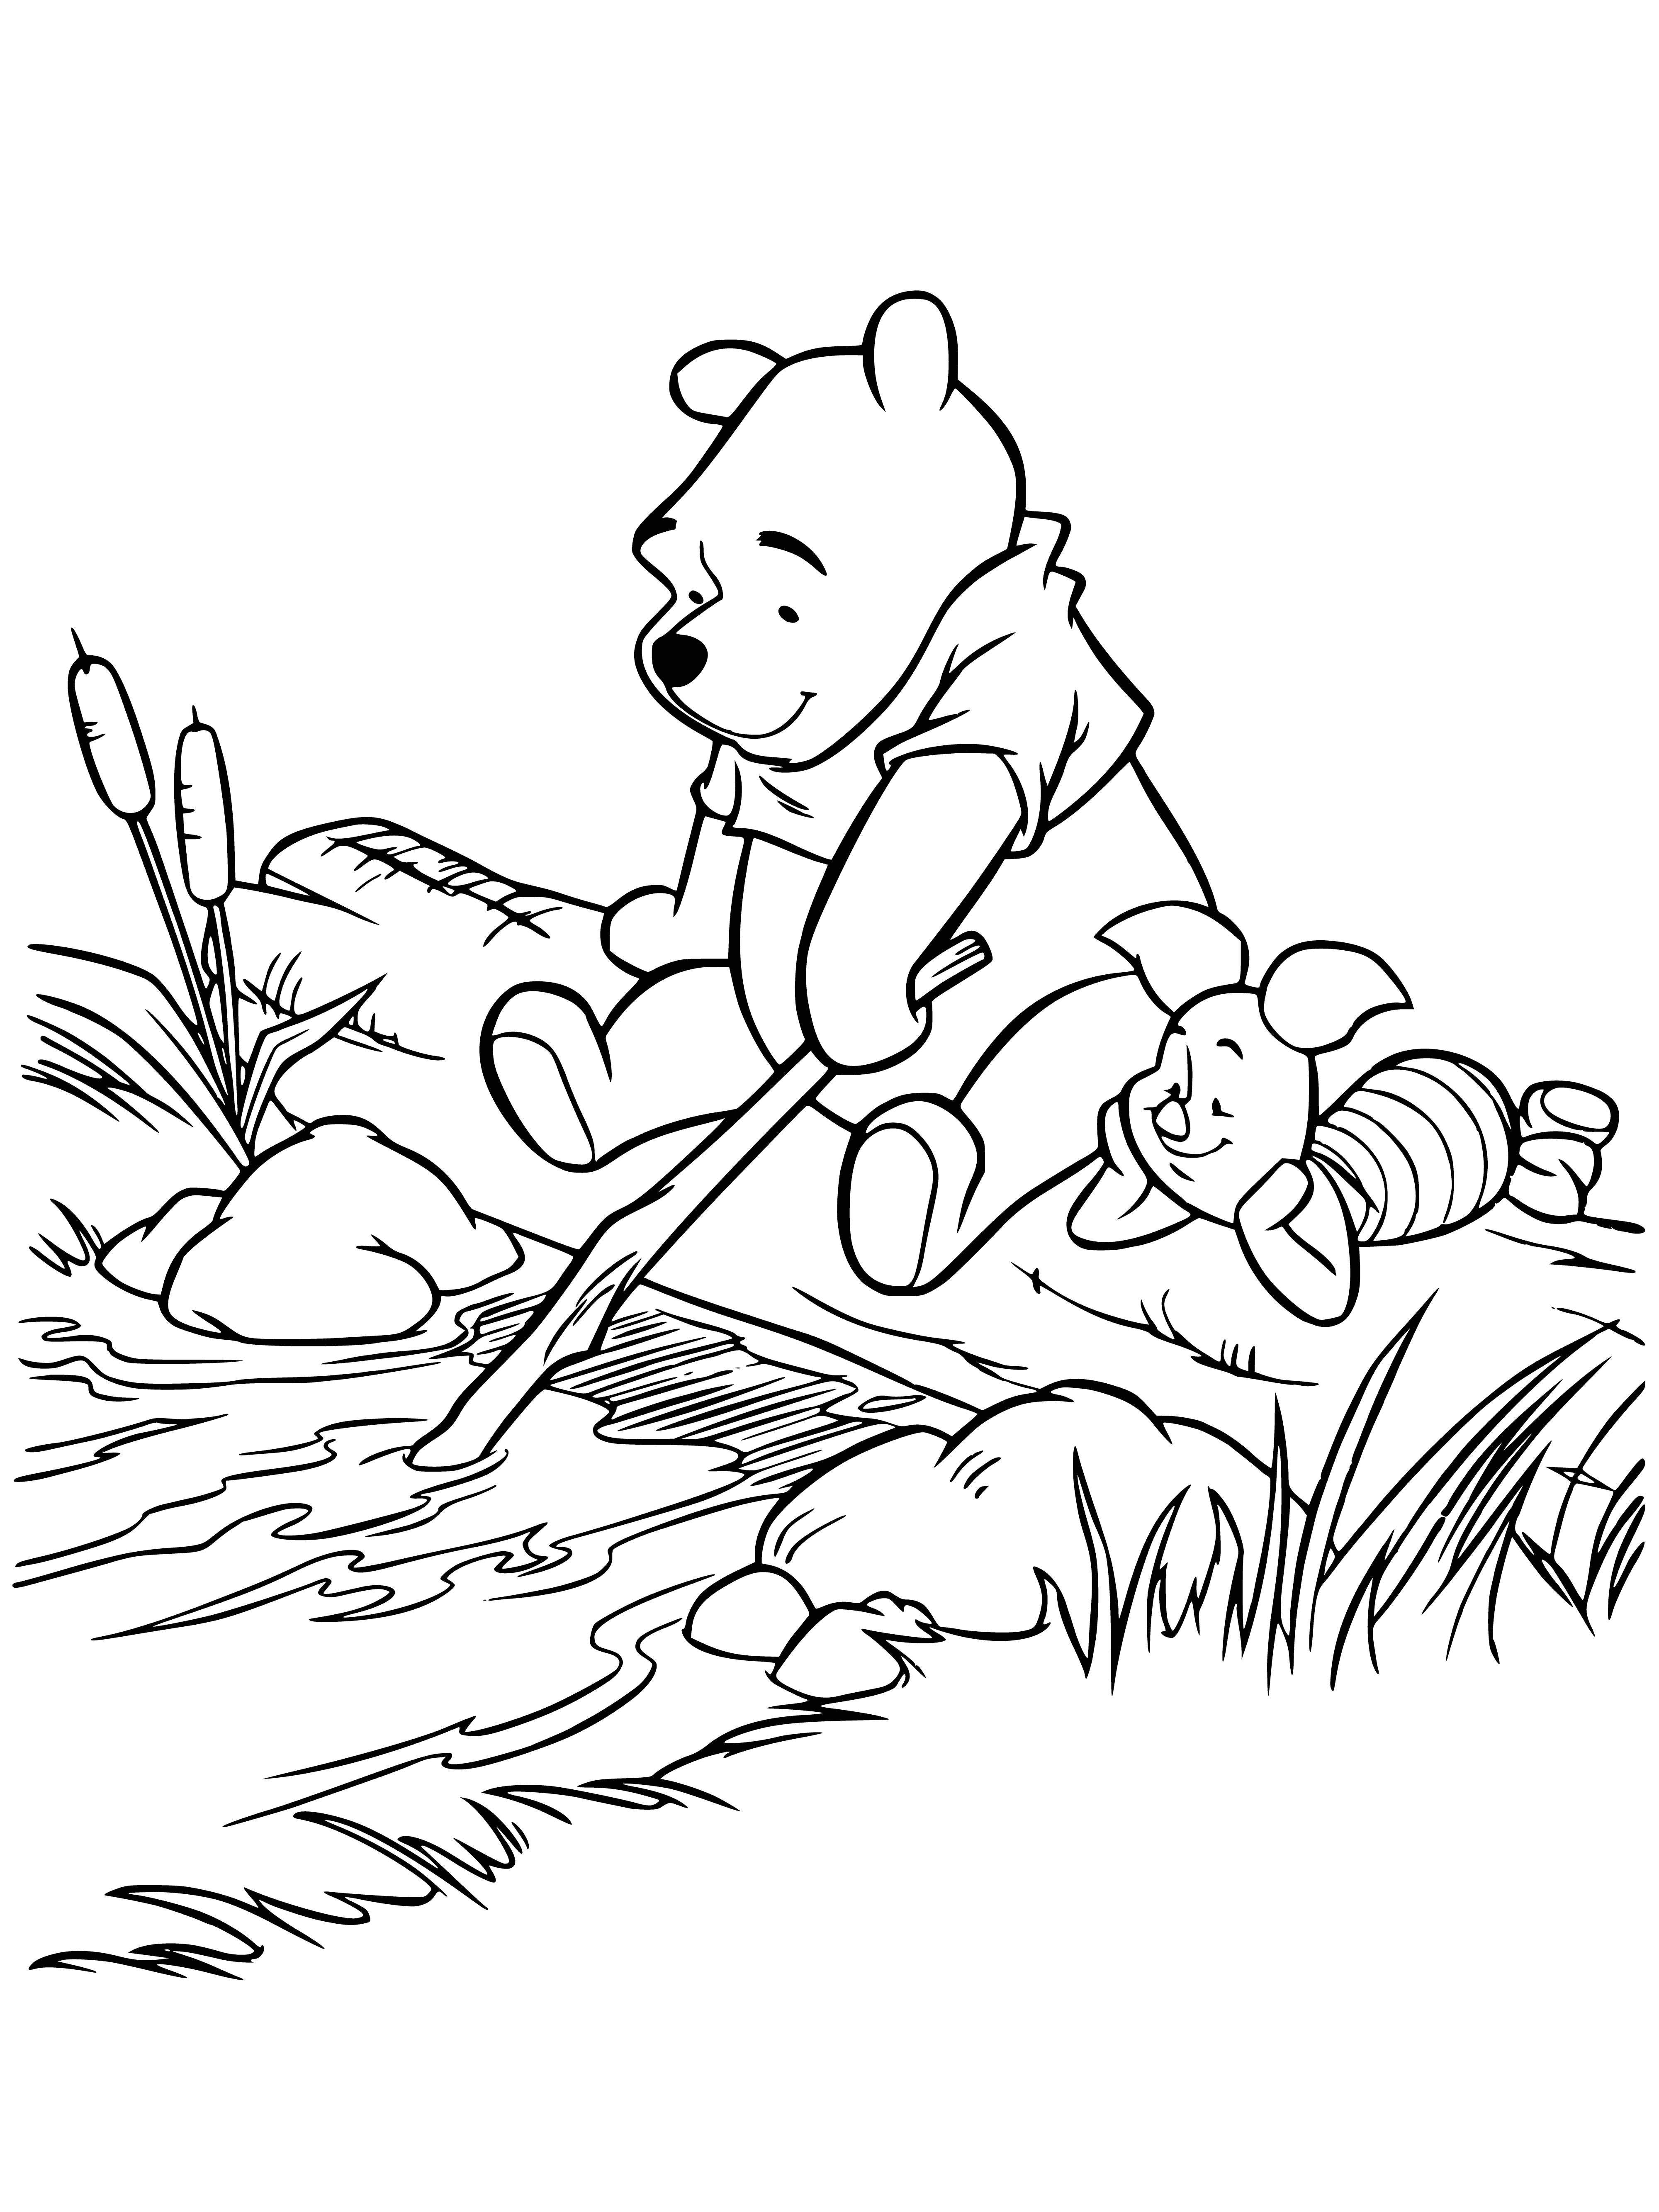 coloring page: Winnie The Pooh is fishing by a river, hoping to catch some fish. His feet are in the water, and he's enjoying the view of the fish.